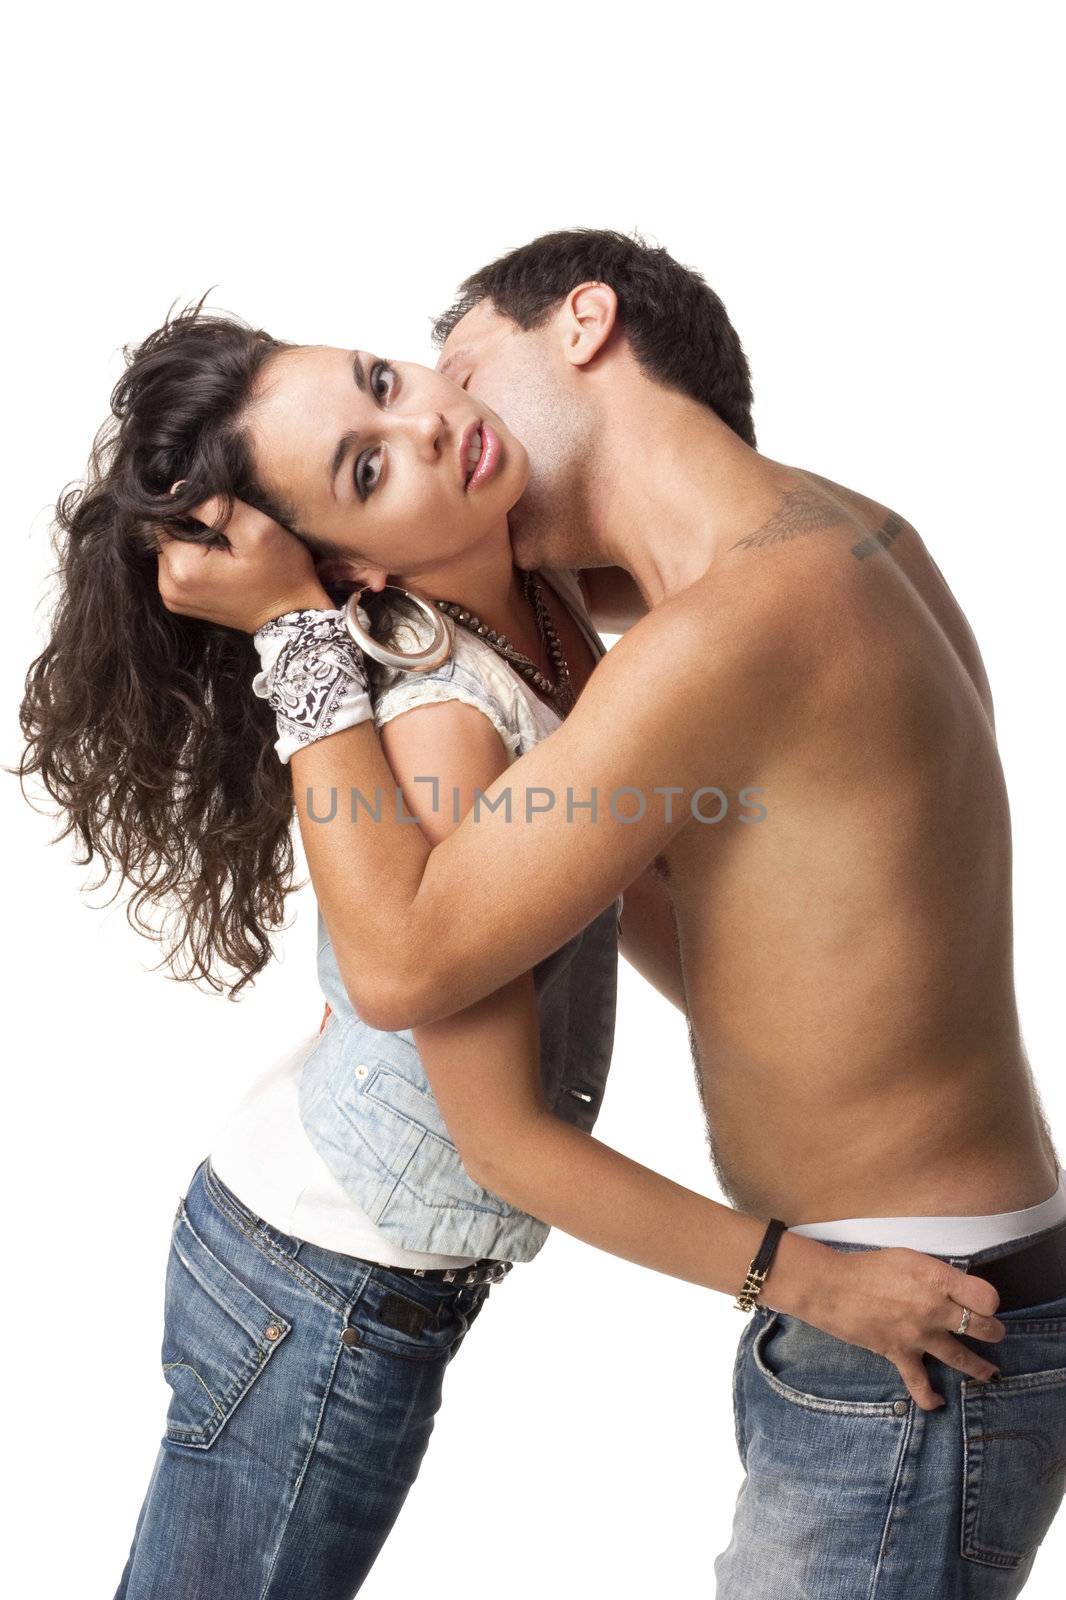 Man embrace his girlfriend and kiss in the neck